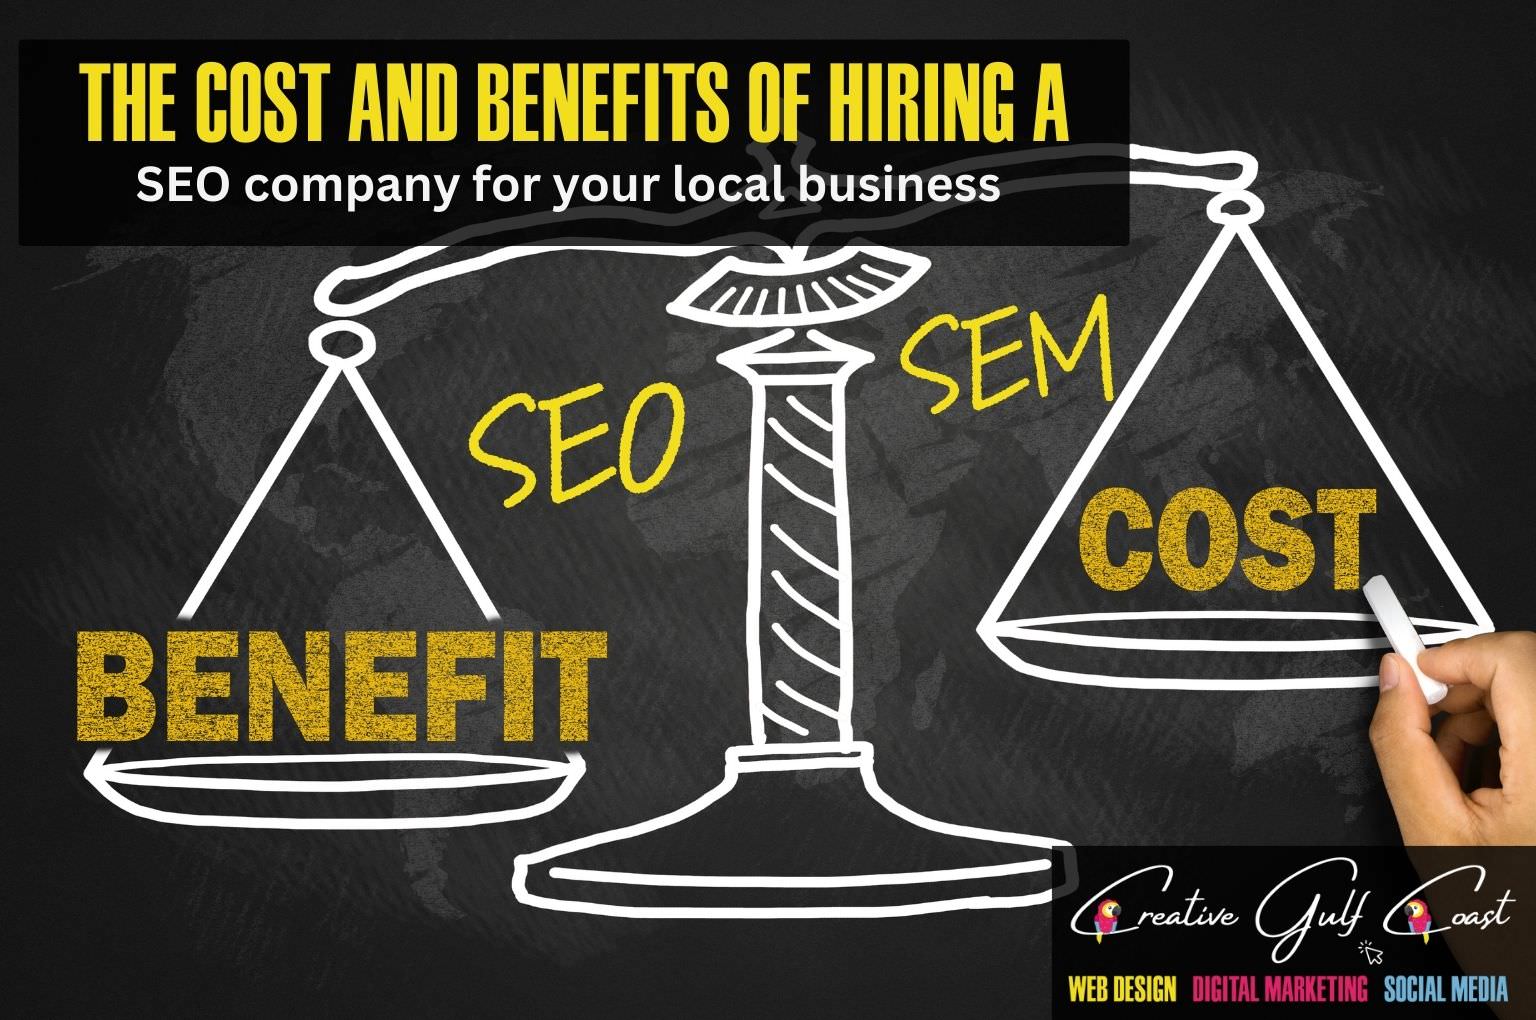 Your benefits and costs of hiring a professional SEO company - Creative Gulf Coast Marketing Tampa Bay Florida